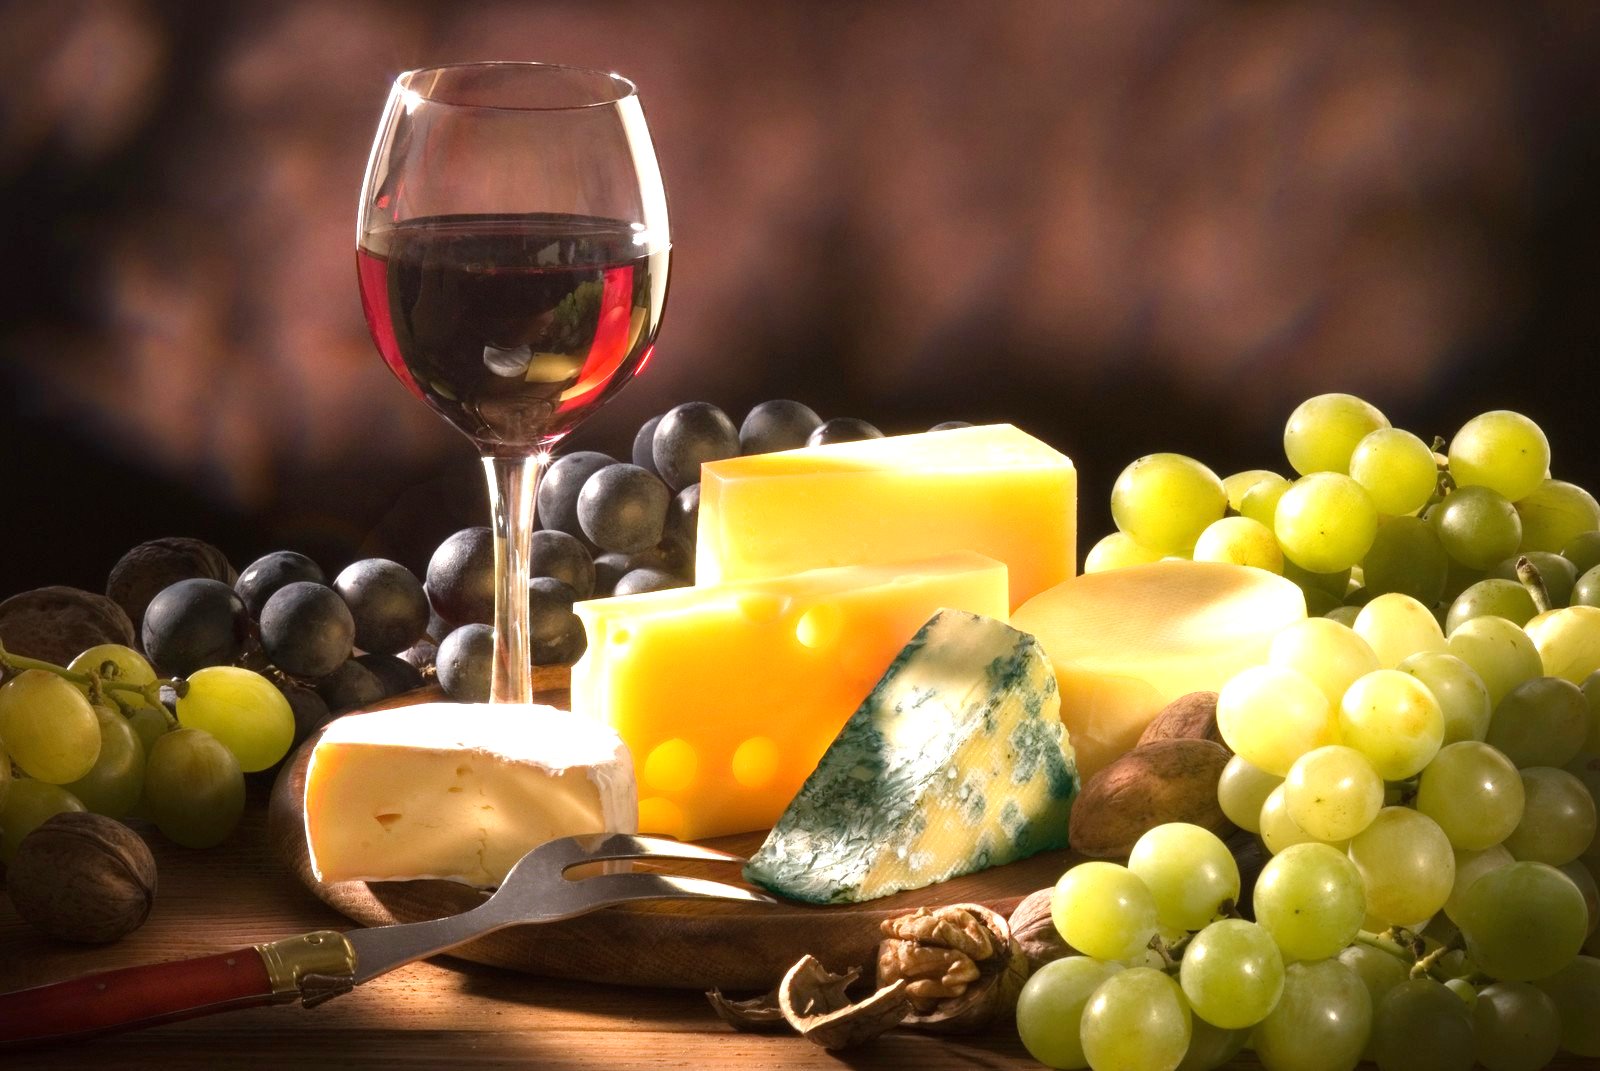 Wine and Cheese Google image from Eventbrite.com